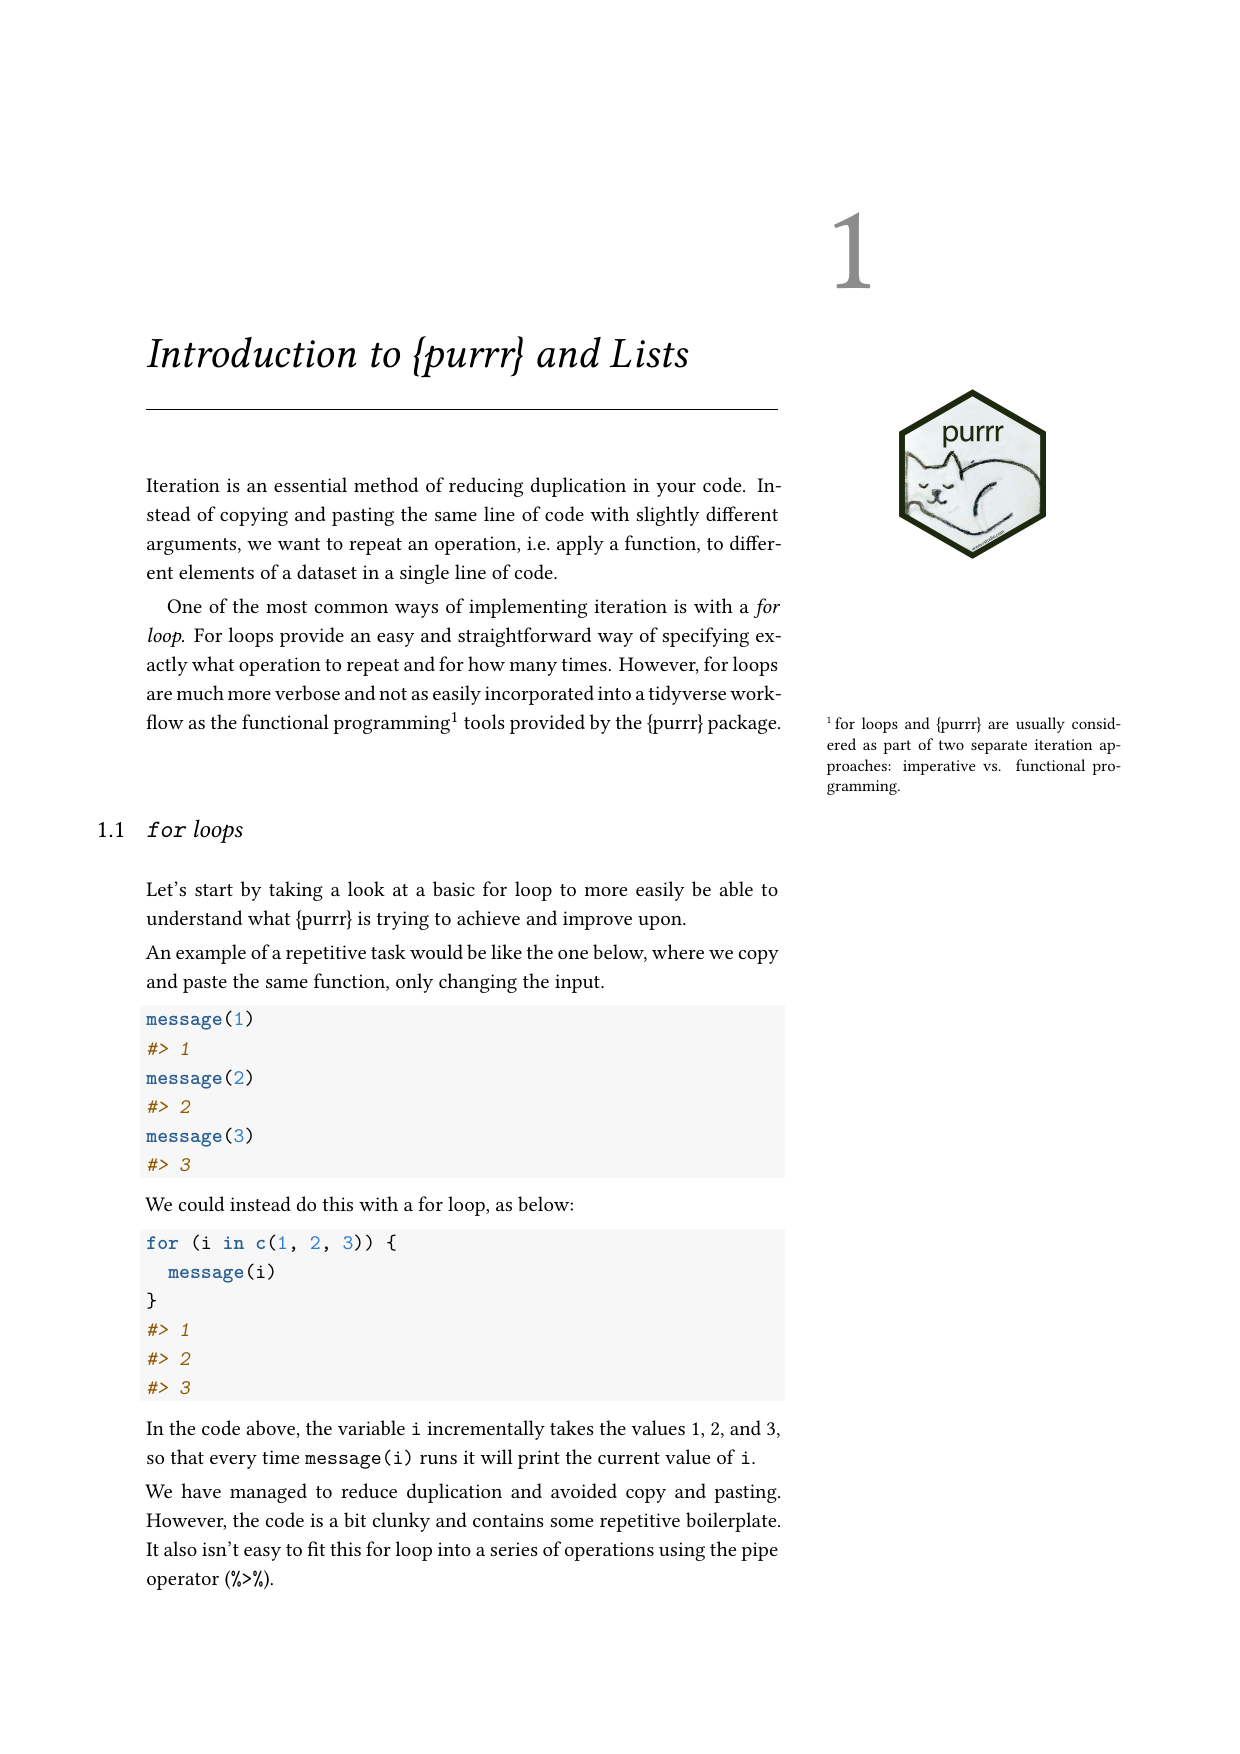 Page 2 of example course material for Functional Programming with purrr